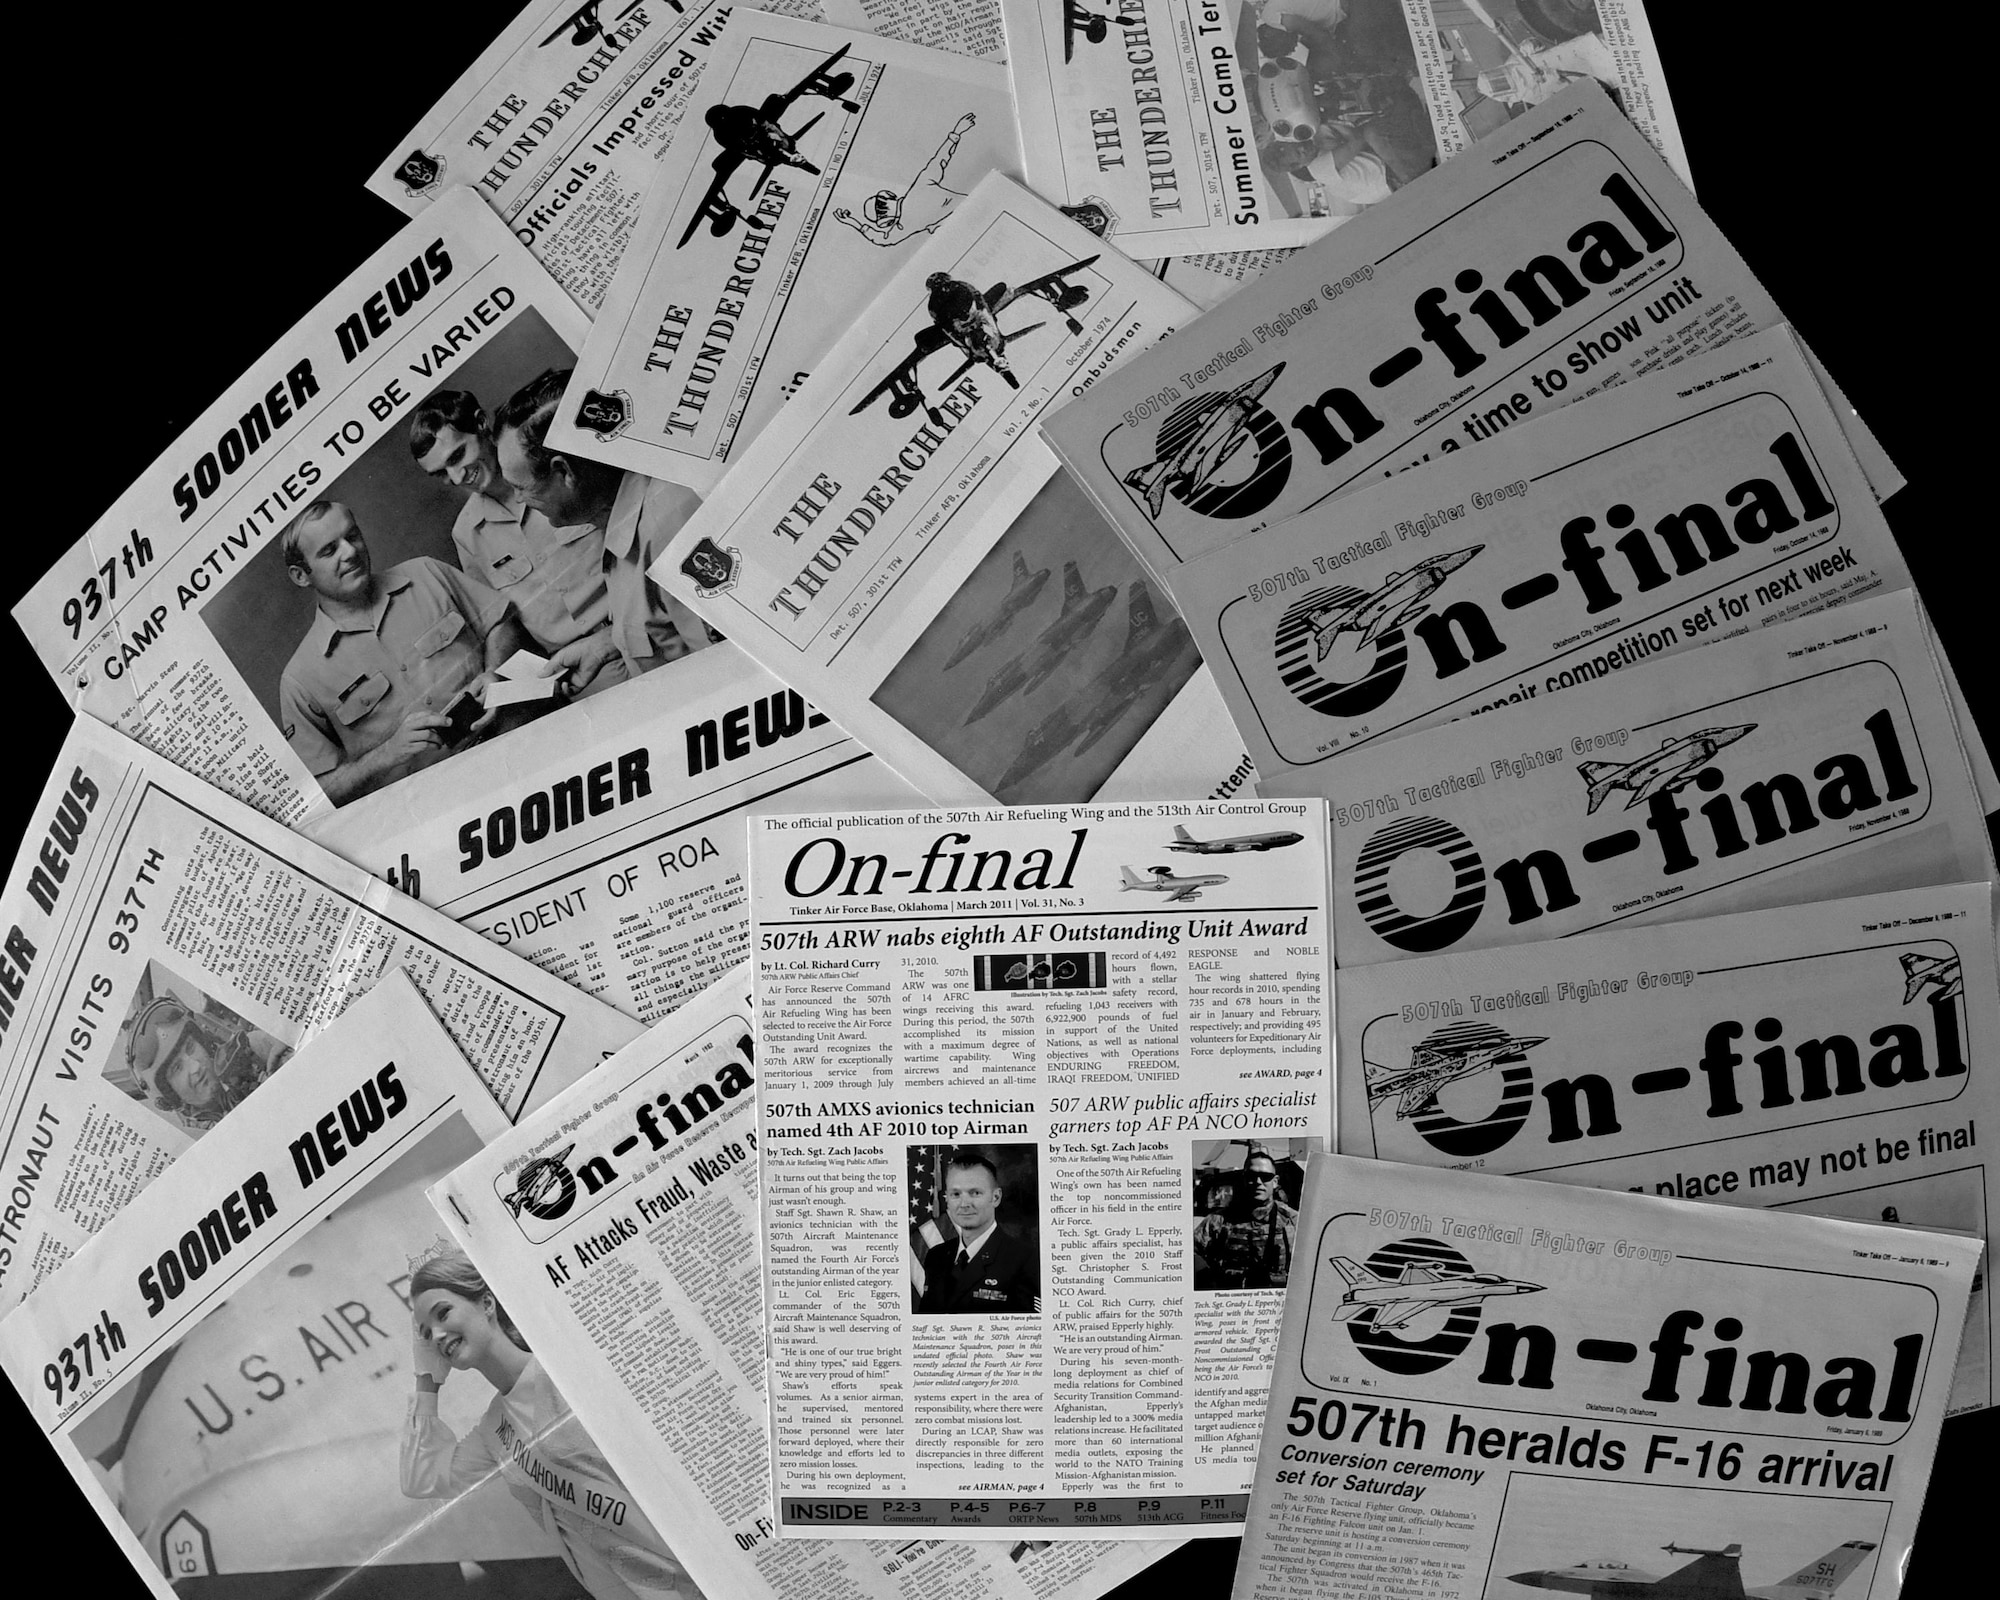 Printed copies of the Sooner News, Thunderchief and On-final newspapers are displayed on a table Feb. 7, 2020, at Tinker Air Force Base, Oklahoma. The 507th Air Refueling Wing Public Affairs office published 30 years worth of historic newspapers in January of this year. (U.S. Air Force photo by Tech. Sgt. Samantha Mathison)